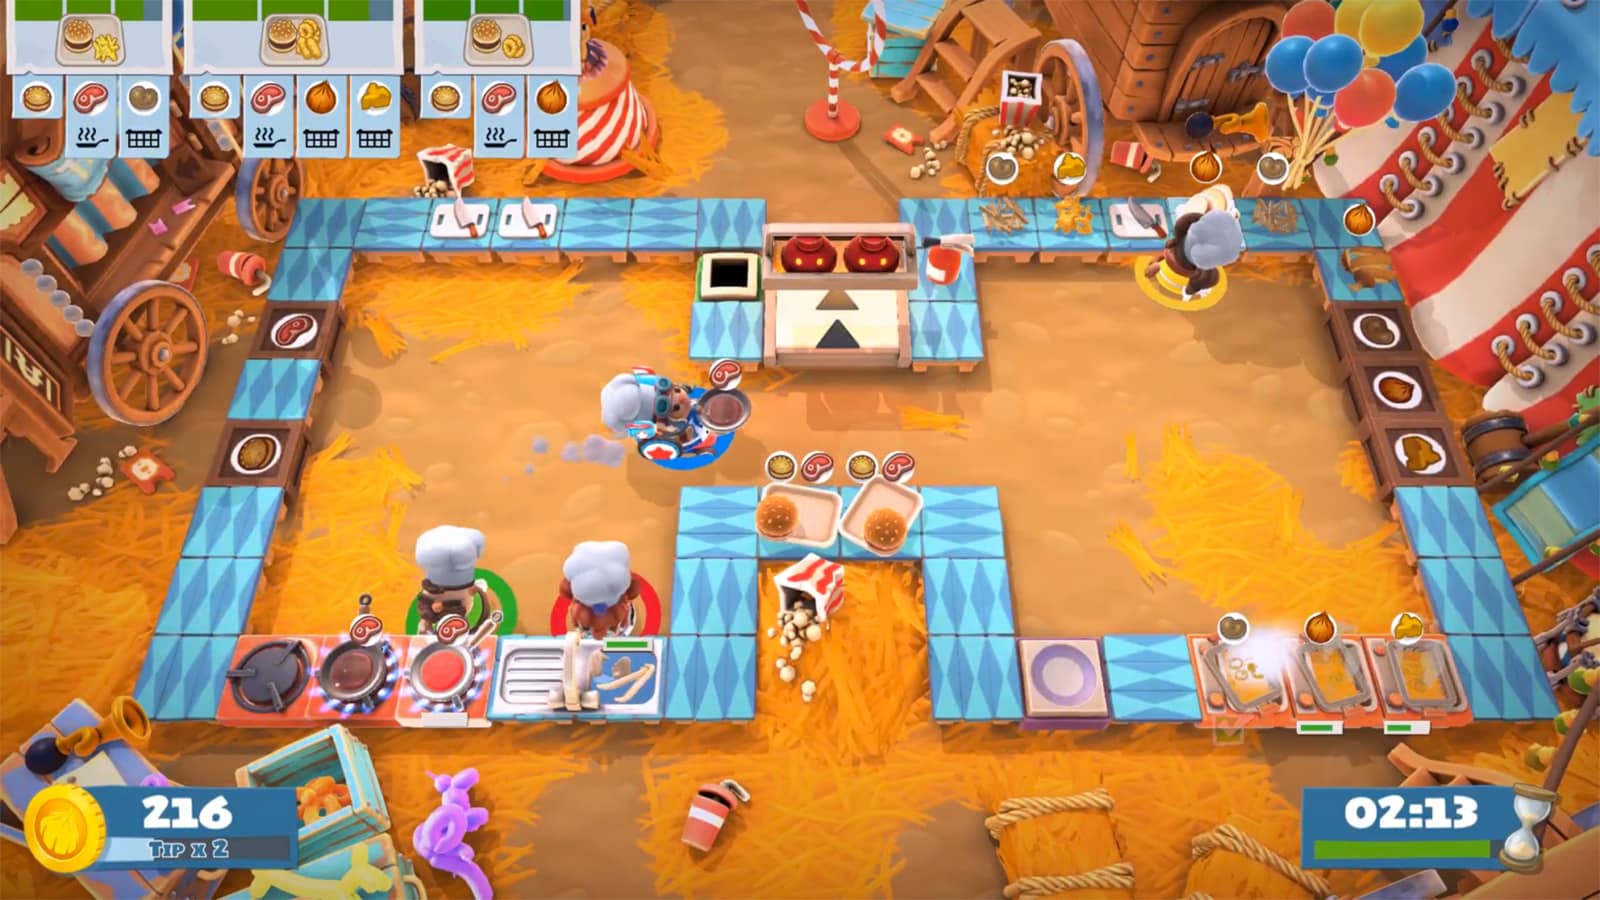 20 Best Cooking Games on Android & PC